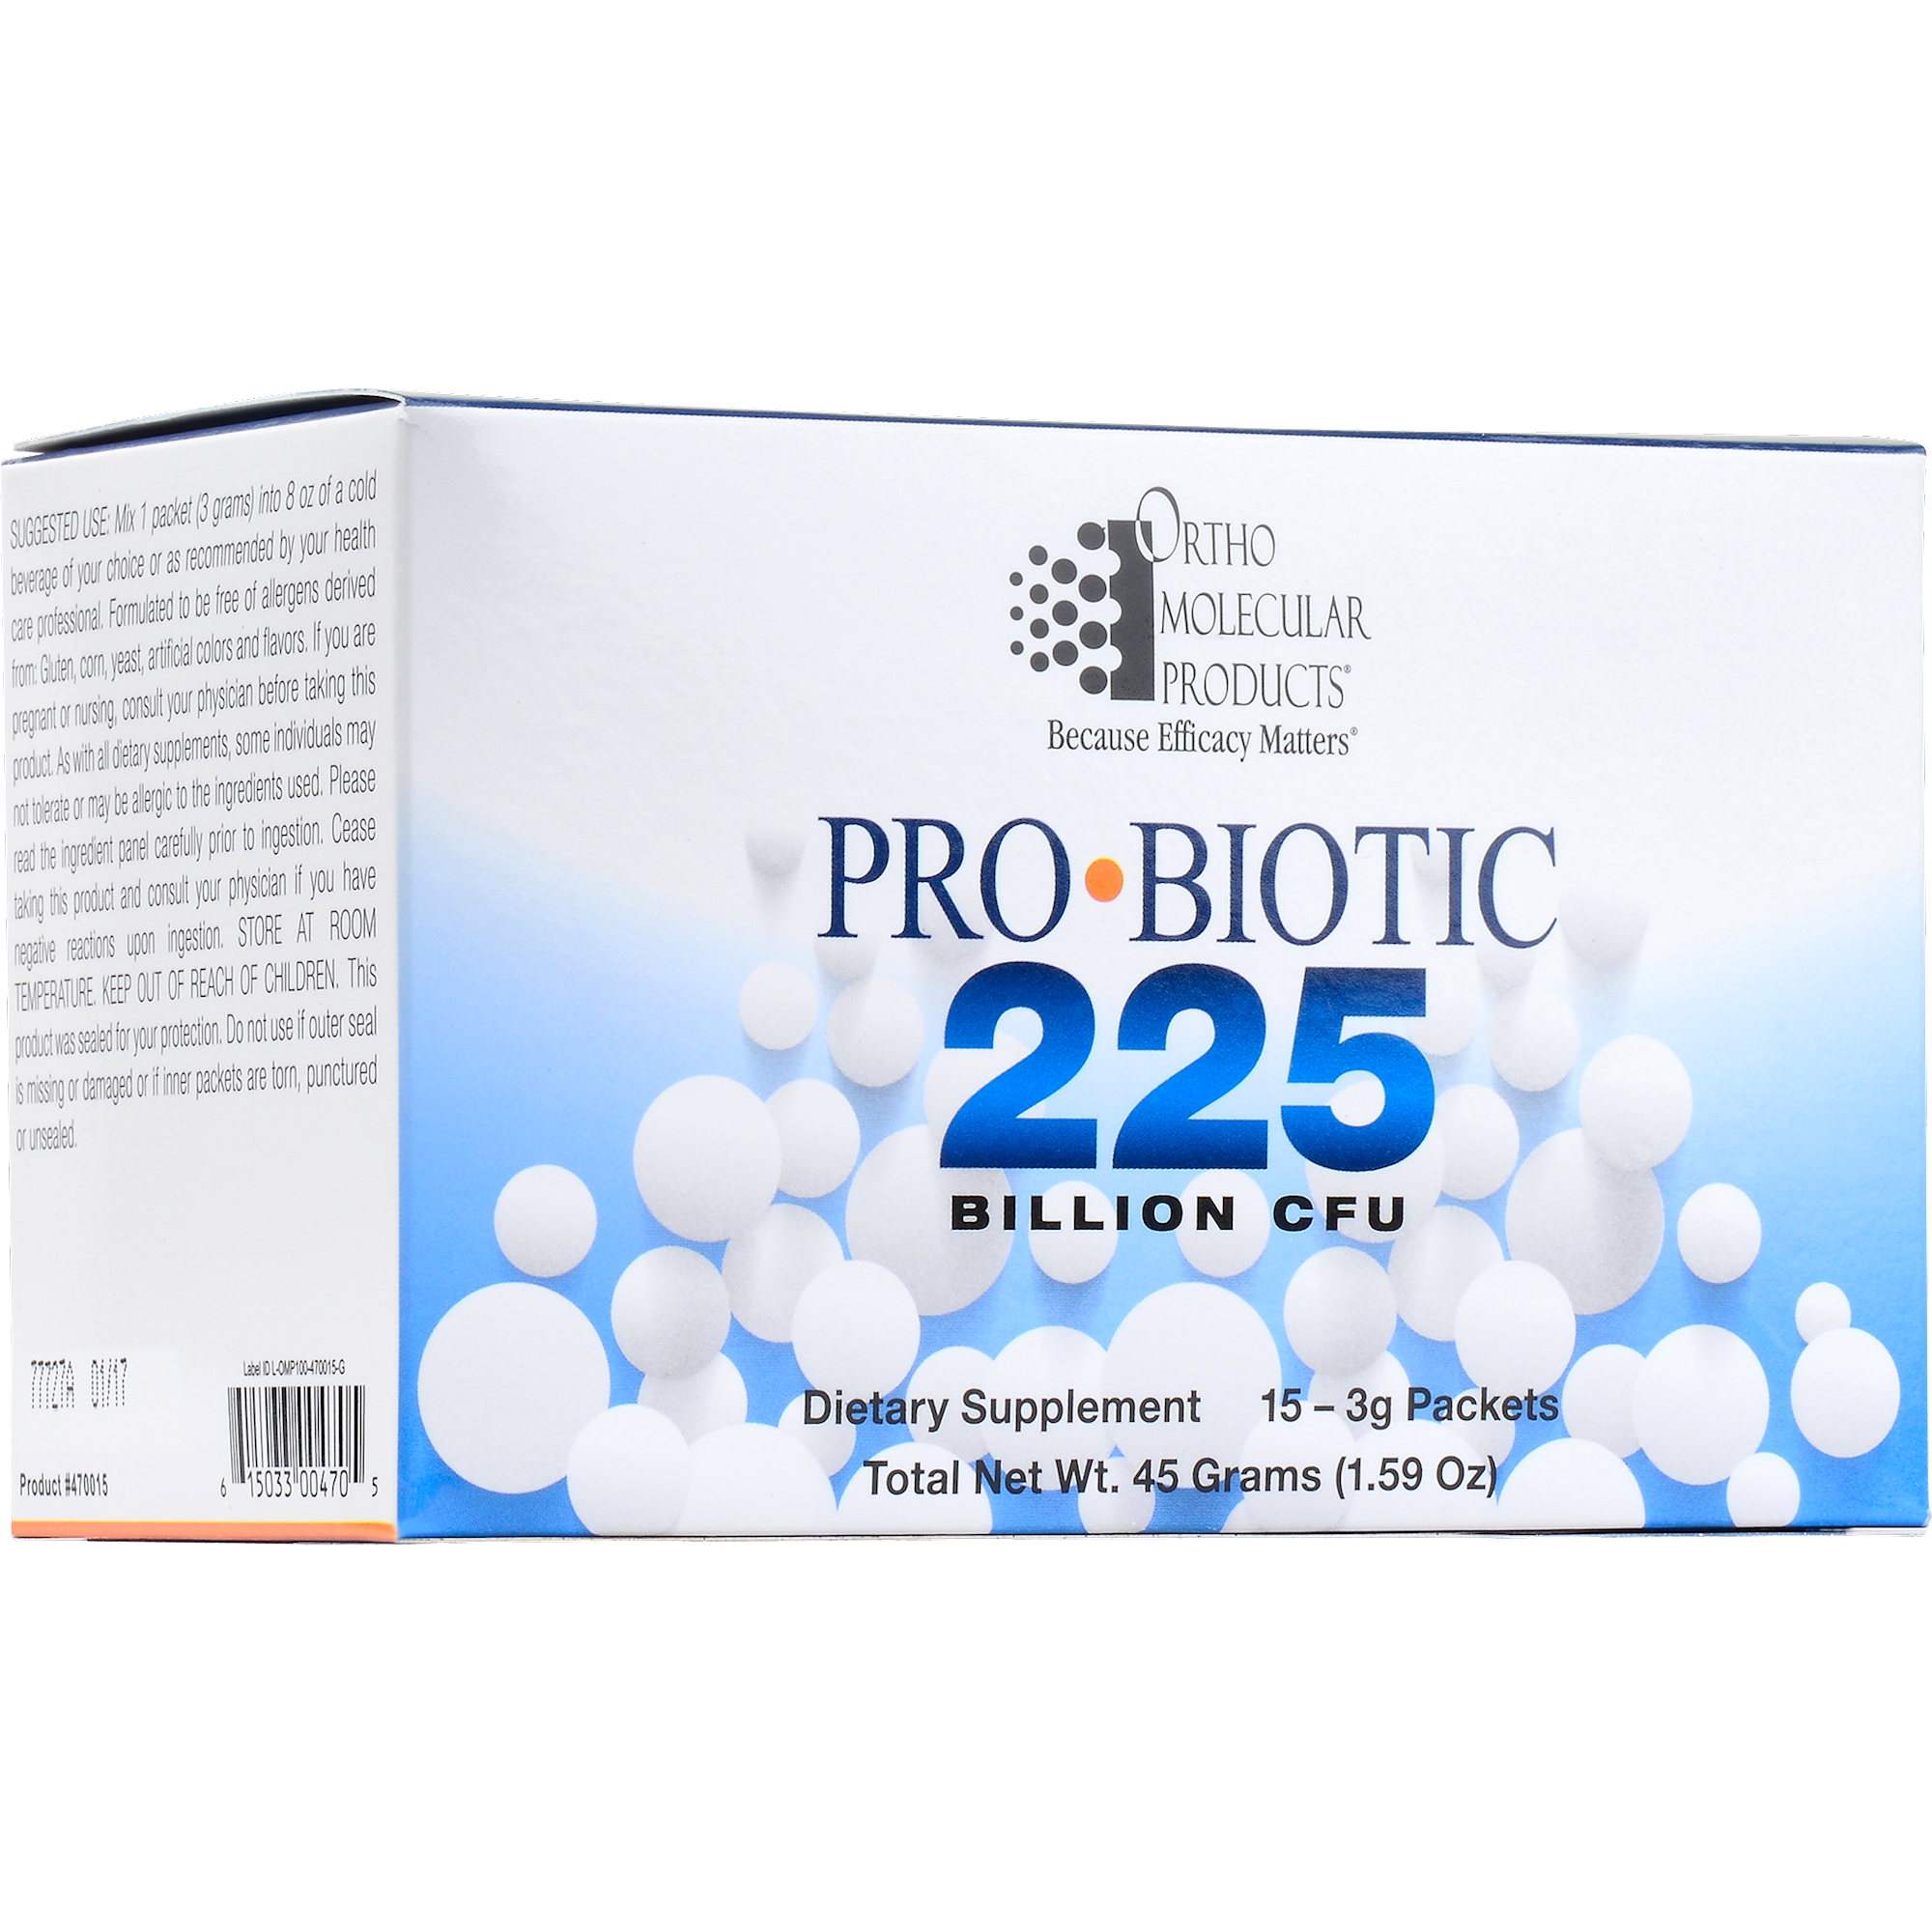 Probiotic 225 15 - 3g Packets